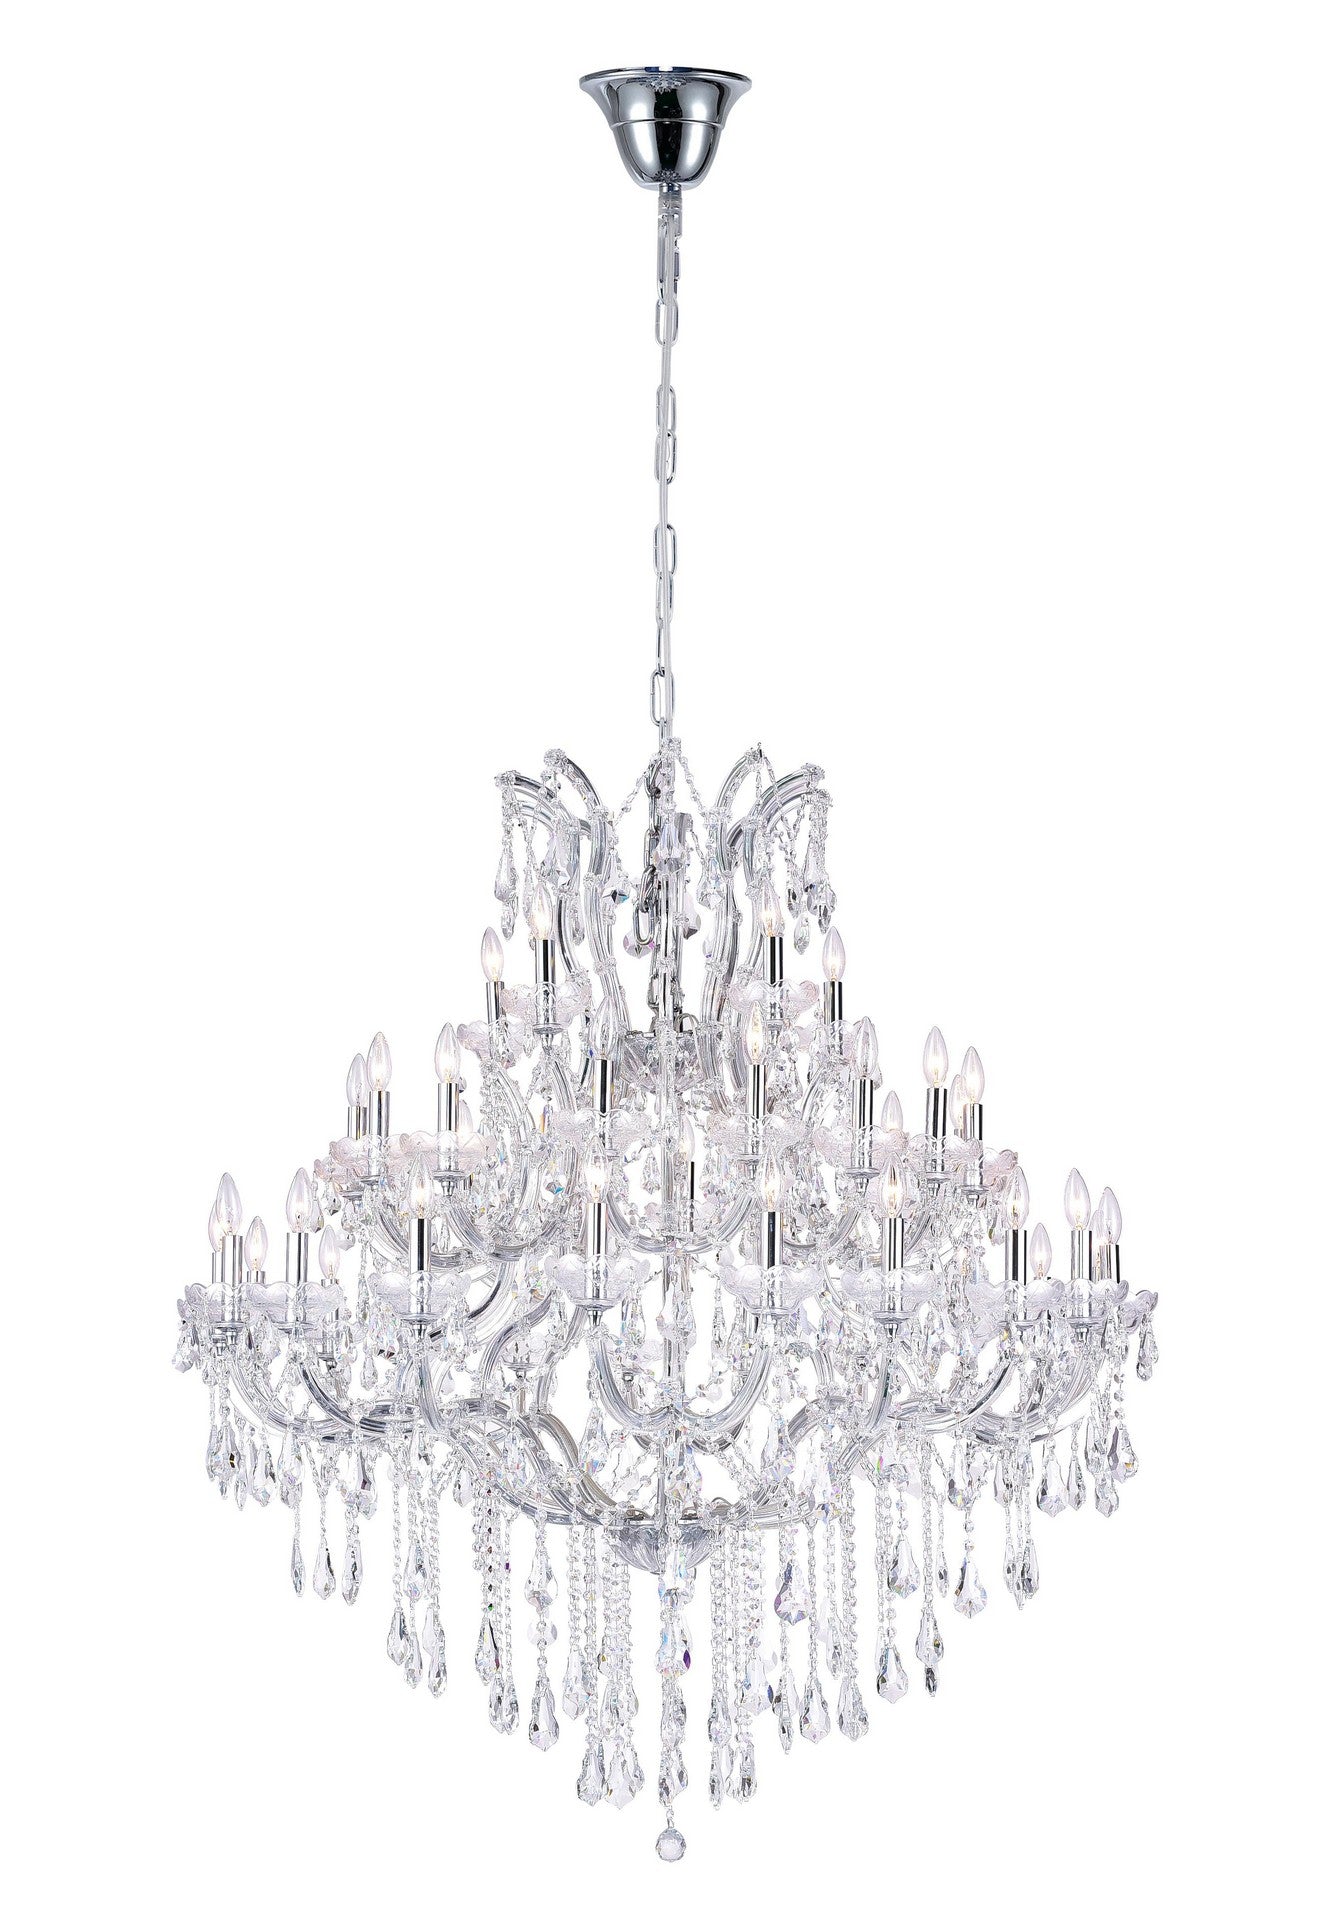 33 LIGHT UP CHANDELIER WITH CHROME FINISH - Dreamart Gallery